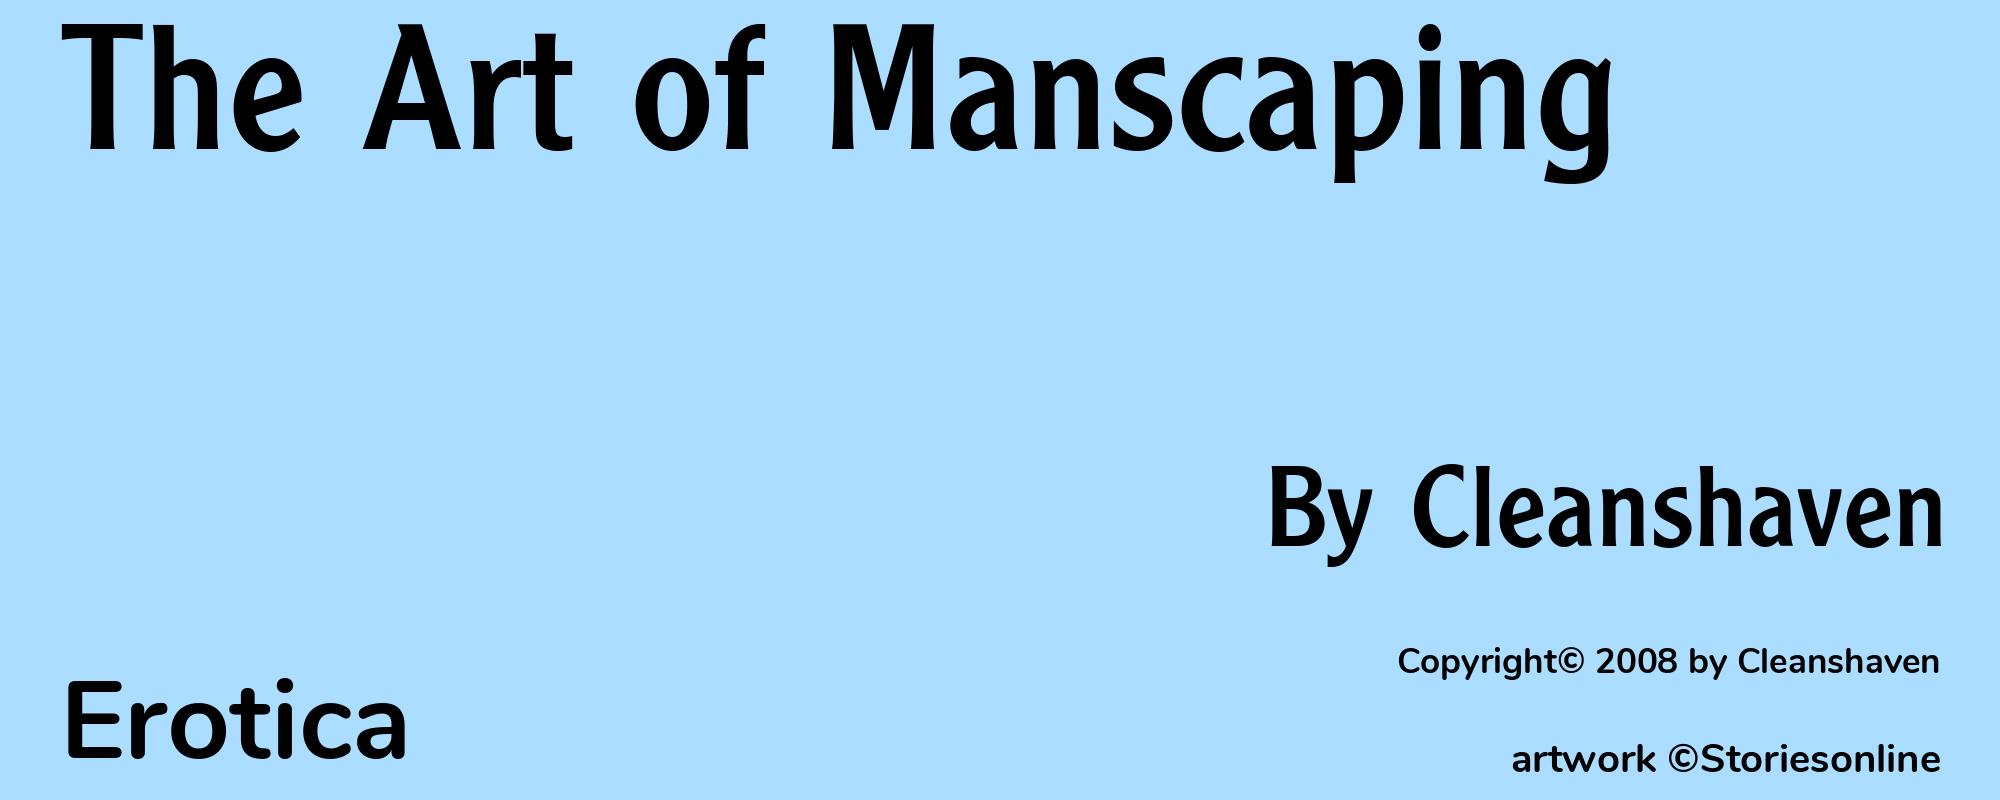 The Art of Manscaping - Cover